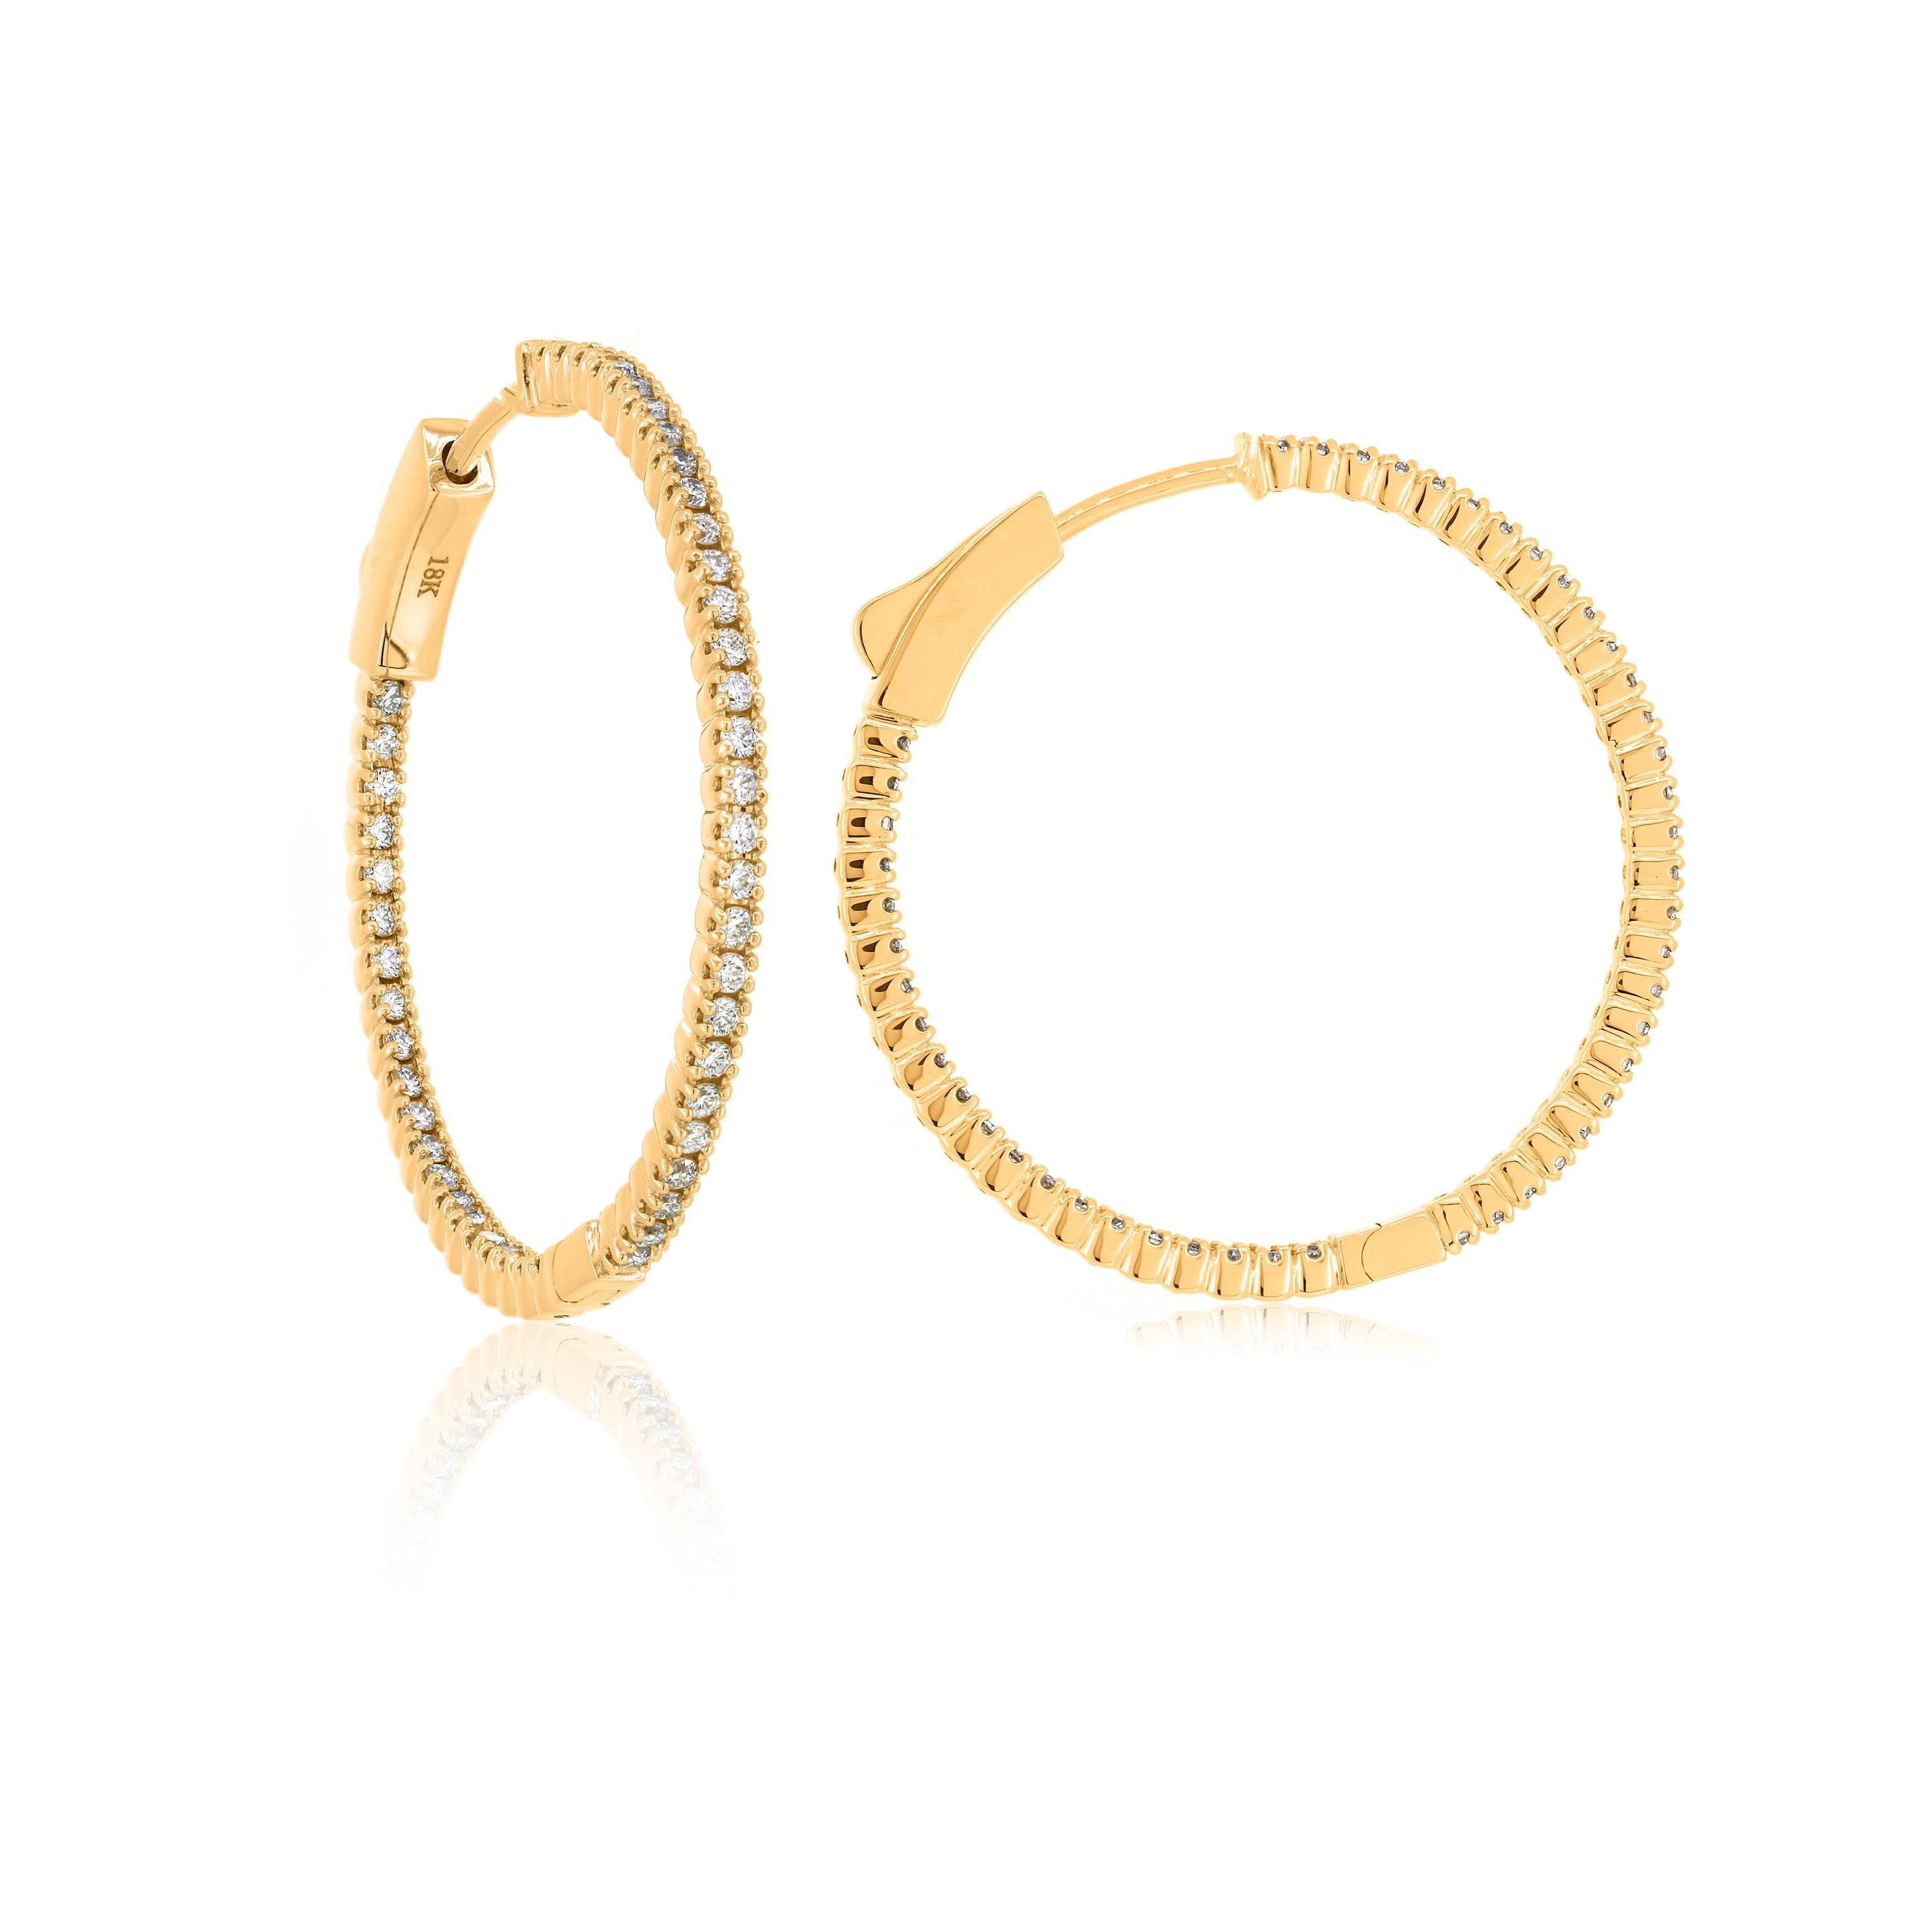 Elegant, timeless, captivating, round brilliant diamond inside and out Luxle hoop earrings in 18k yellow gold, for pierced ears. These elegant earrings feature 96 round brilliant cut diamonds with GH color and I1 clarity both on the inner and outer